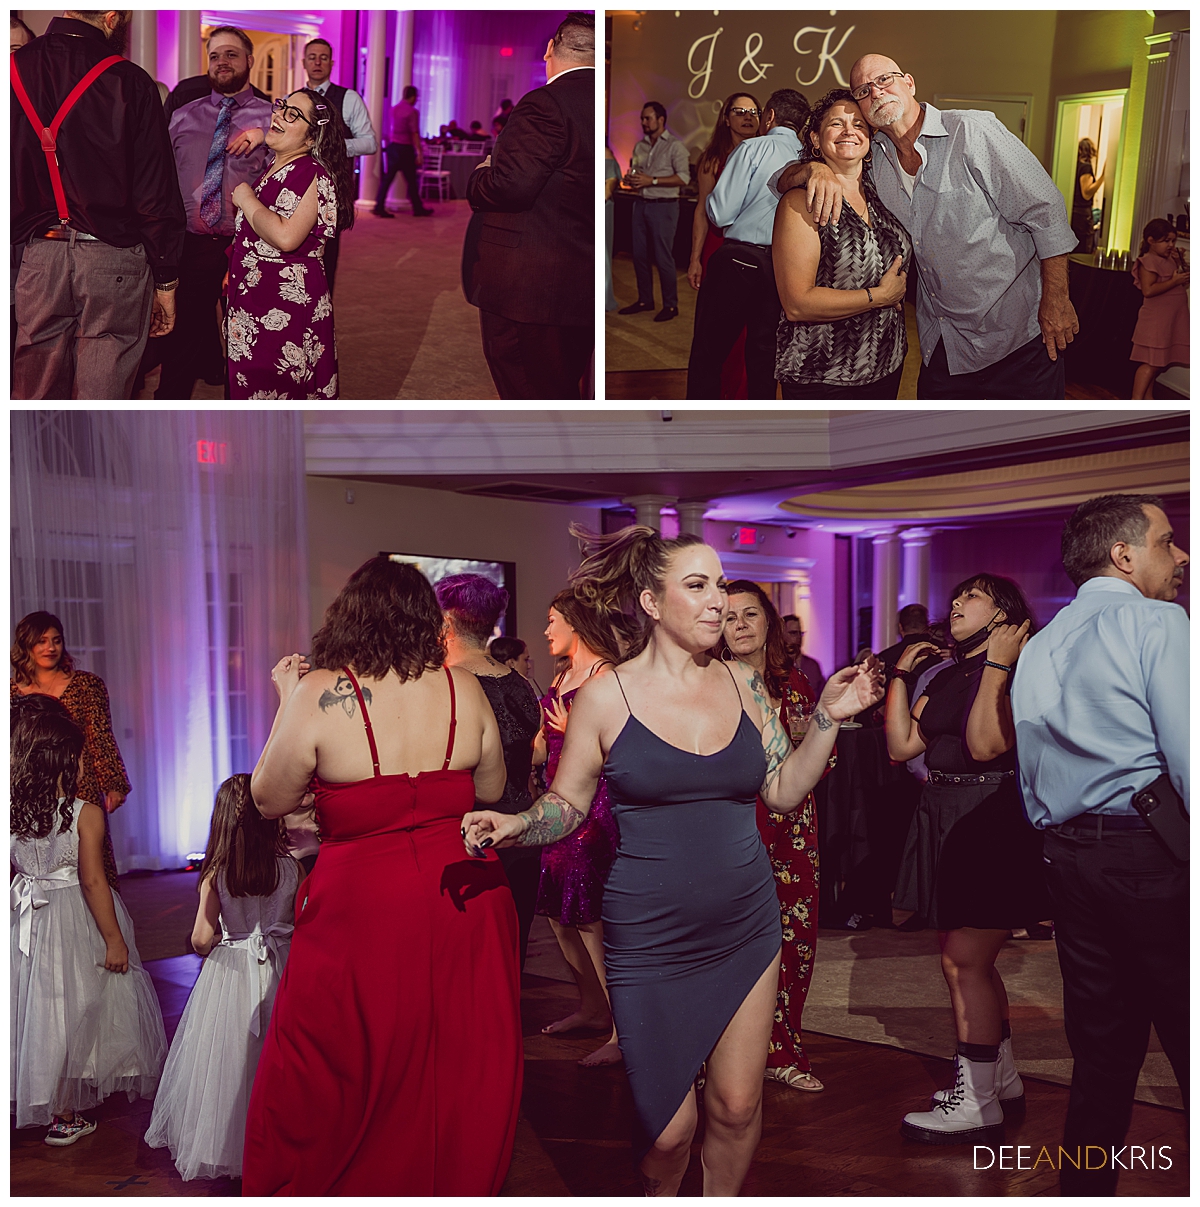 Three images of guests dancing and celebrating.